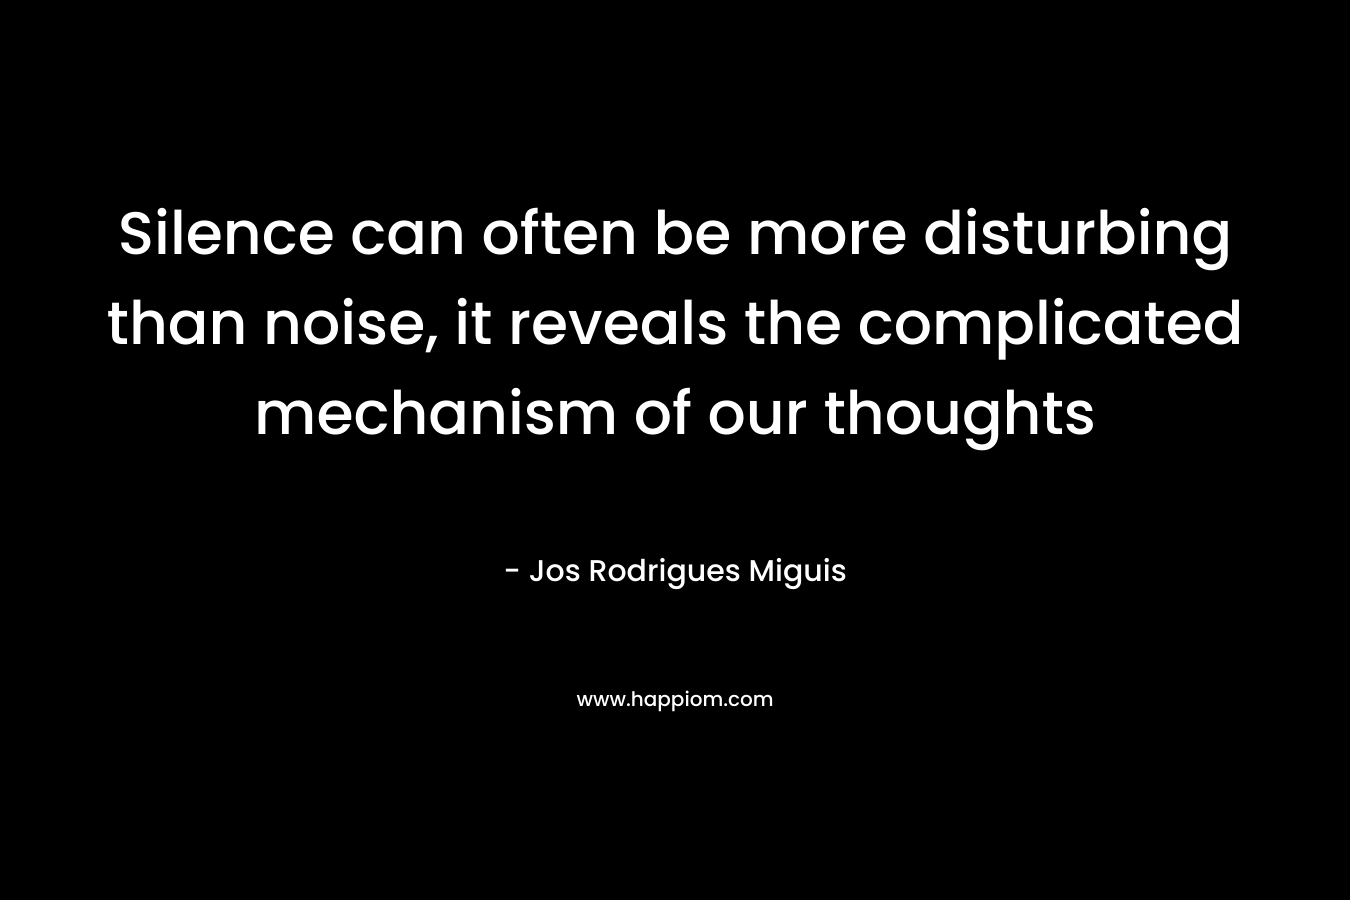 Silence can often be more disturbing than noise, it reveals the complicated mechanism of our thoughts